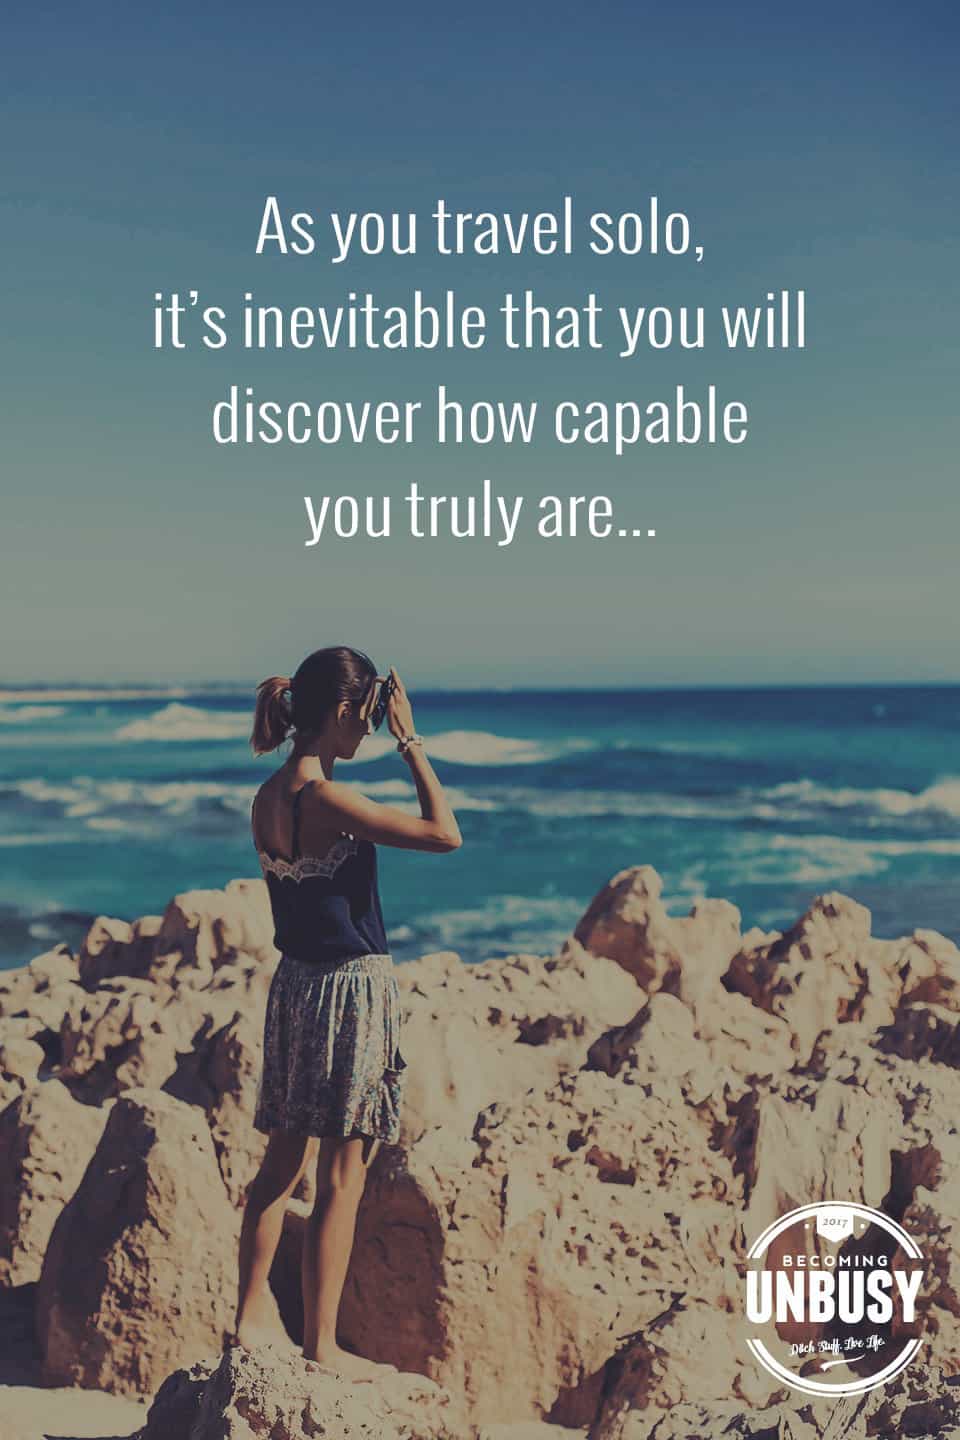 The following winter self-care quote over a photo of a woman alone on a beach, "As you travel solo, it's inevitable that you will discover how capable you are..."